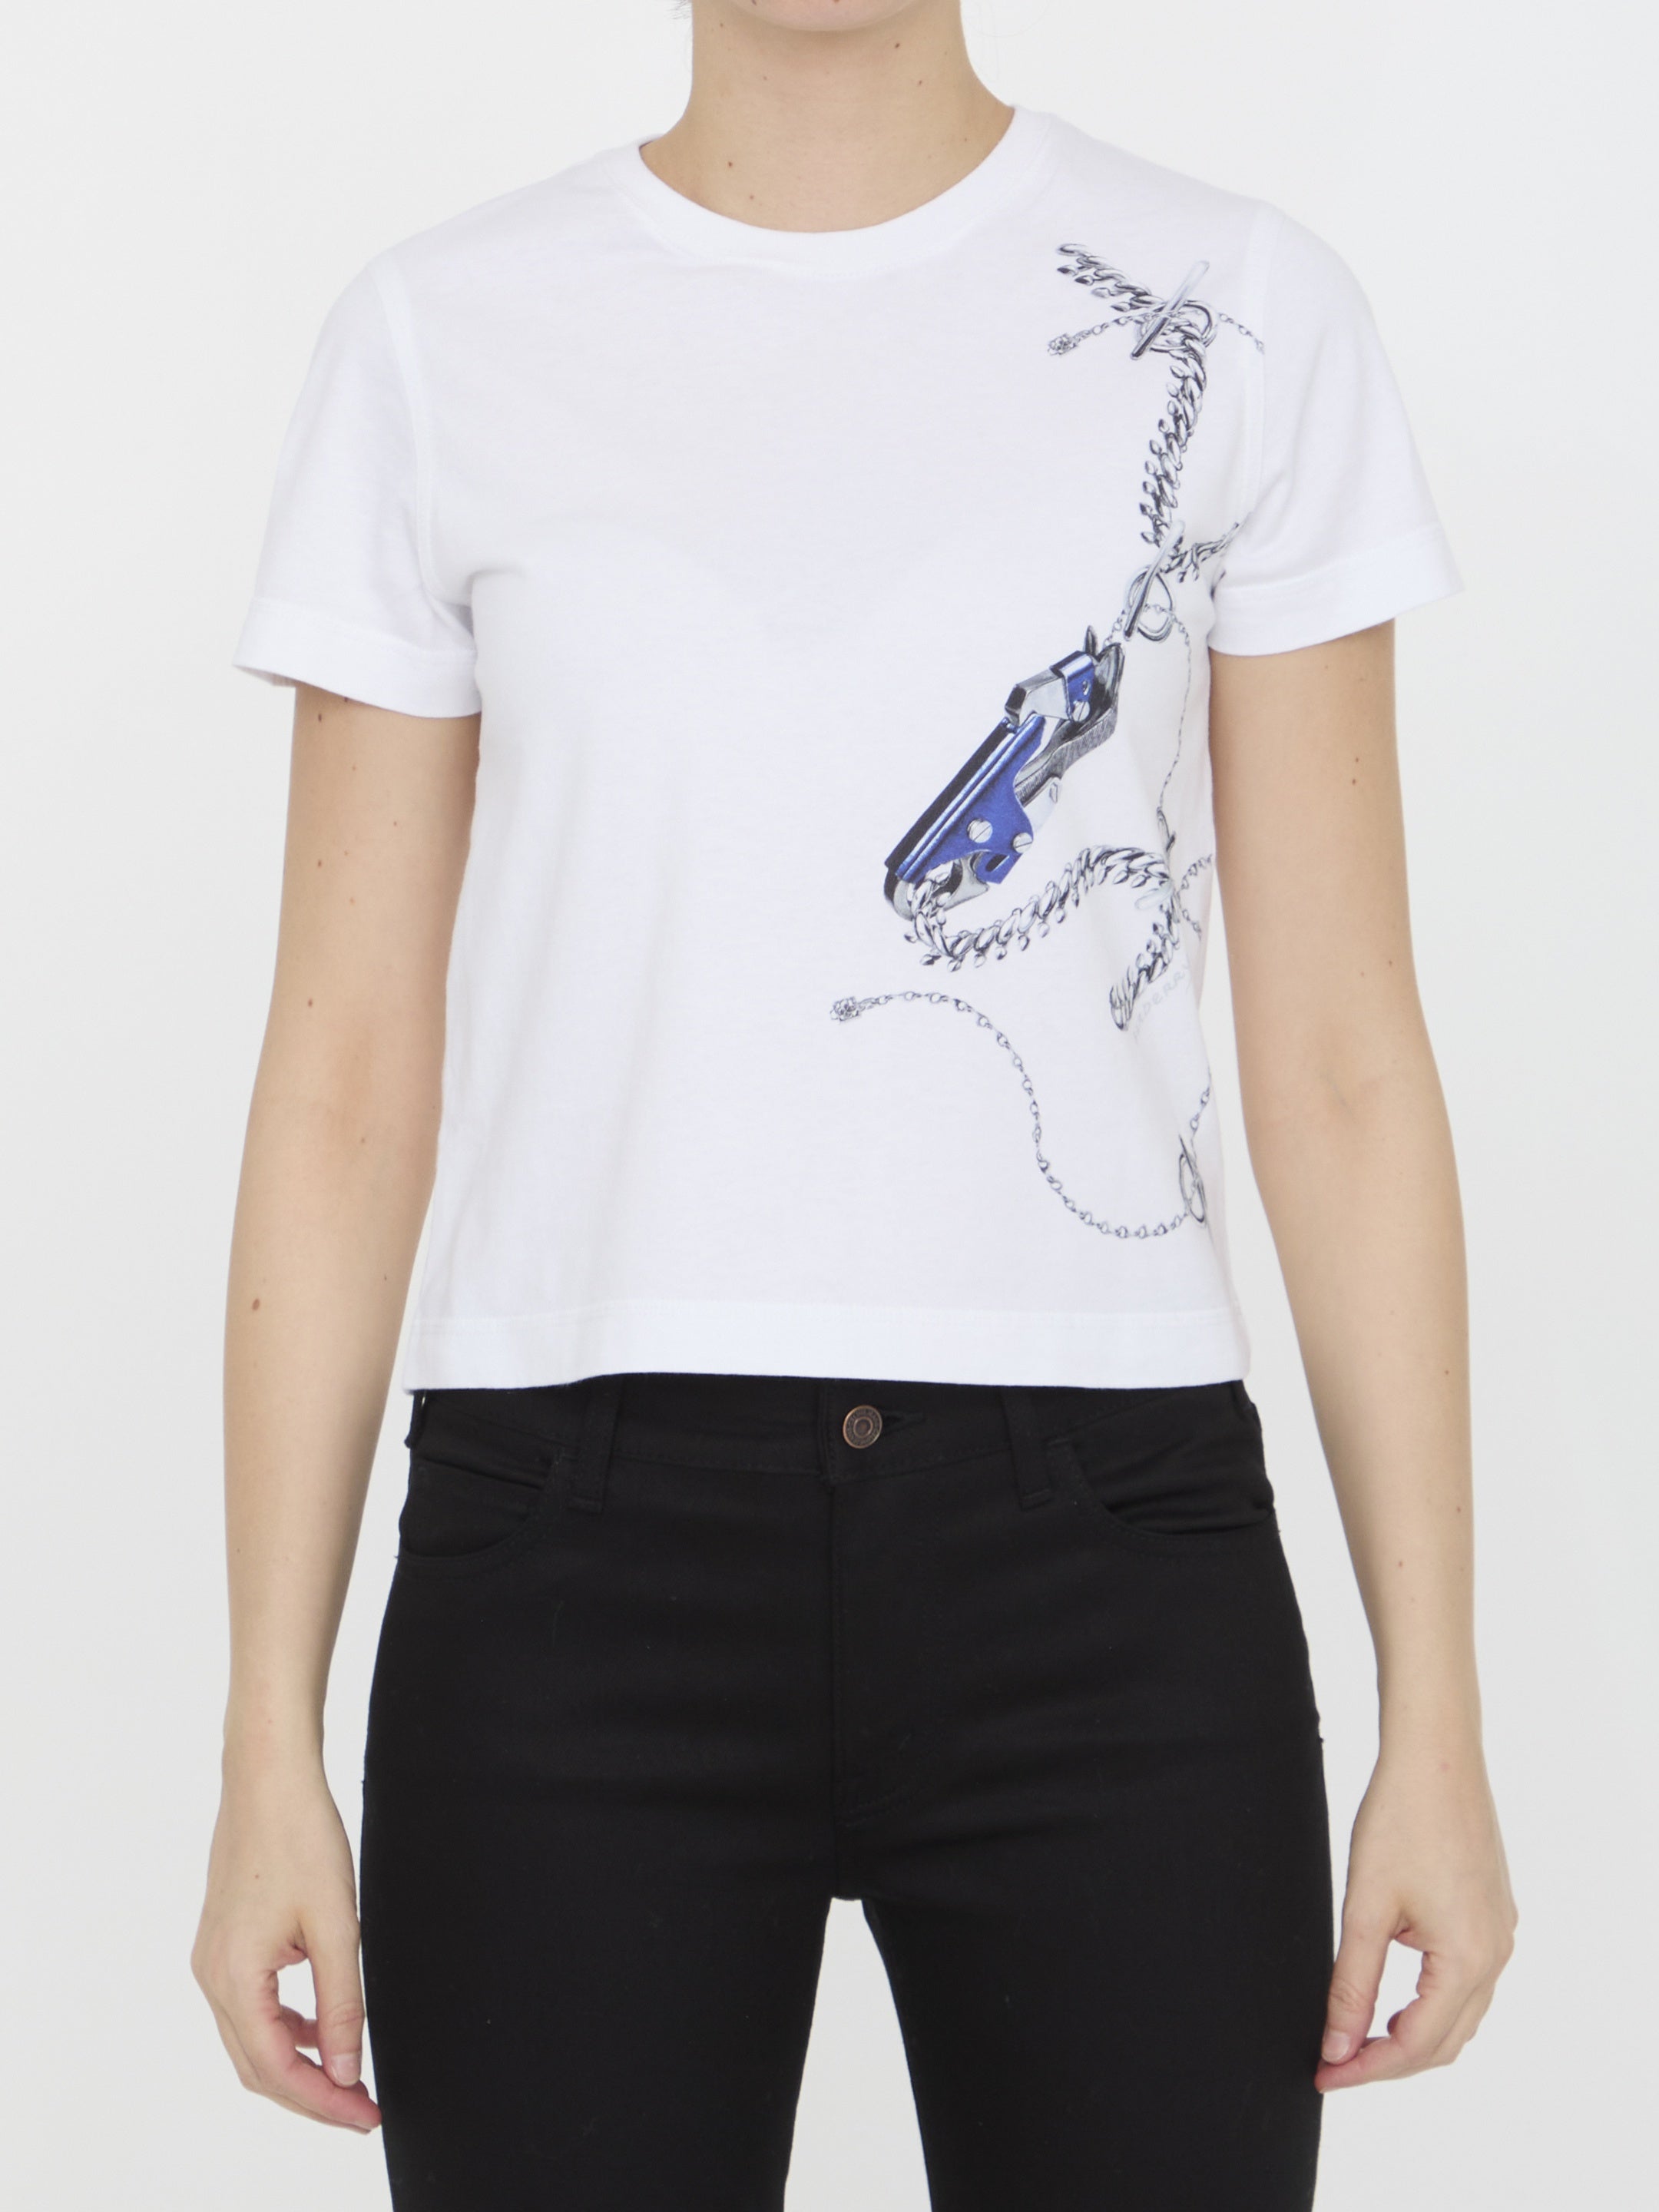 BURBERRY-OUTLET-SALE-Knight-motif-t-shirt-Shirts-M-WHITE-ARCHIVE-COLLECTION.jpg